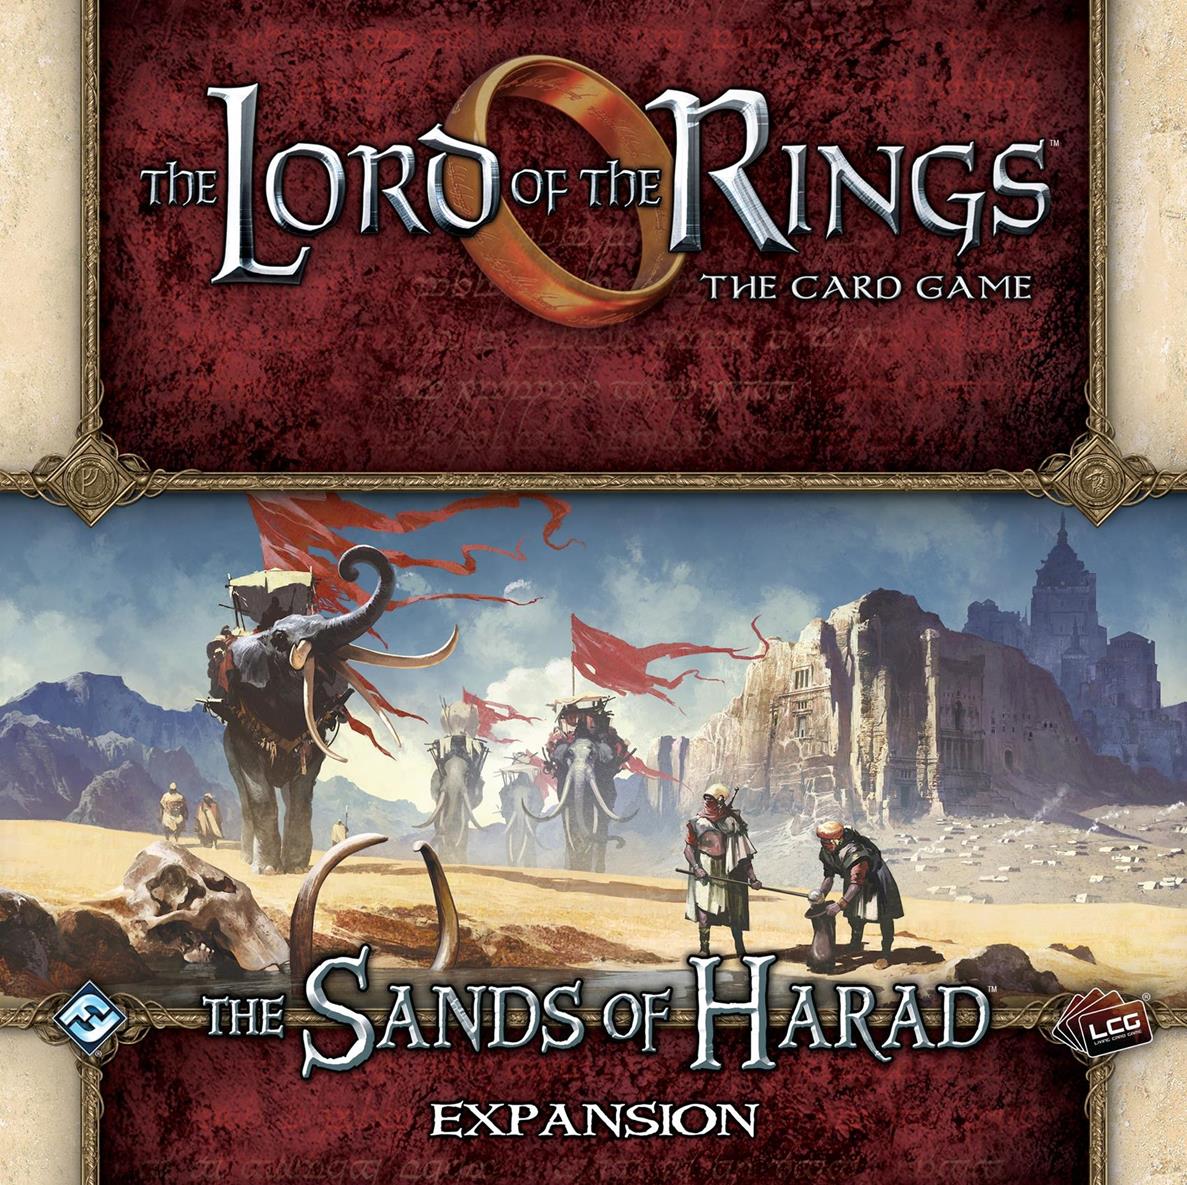 Lord of the Rings LCG: The Sands of Harad Expansion